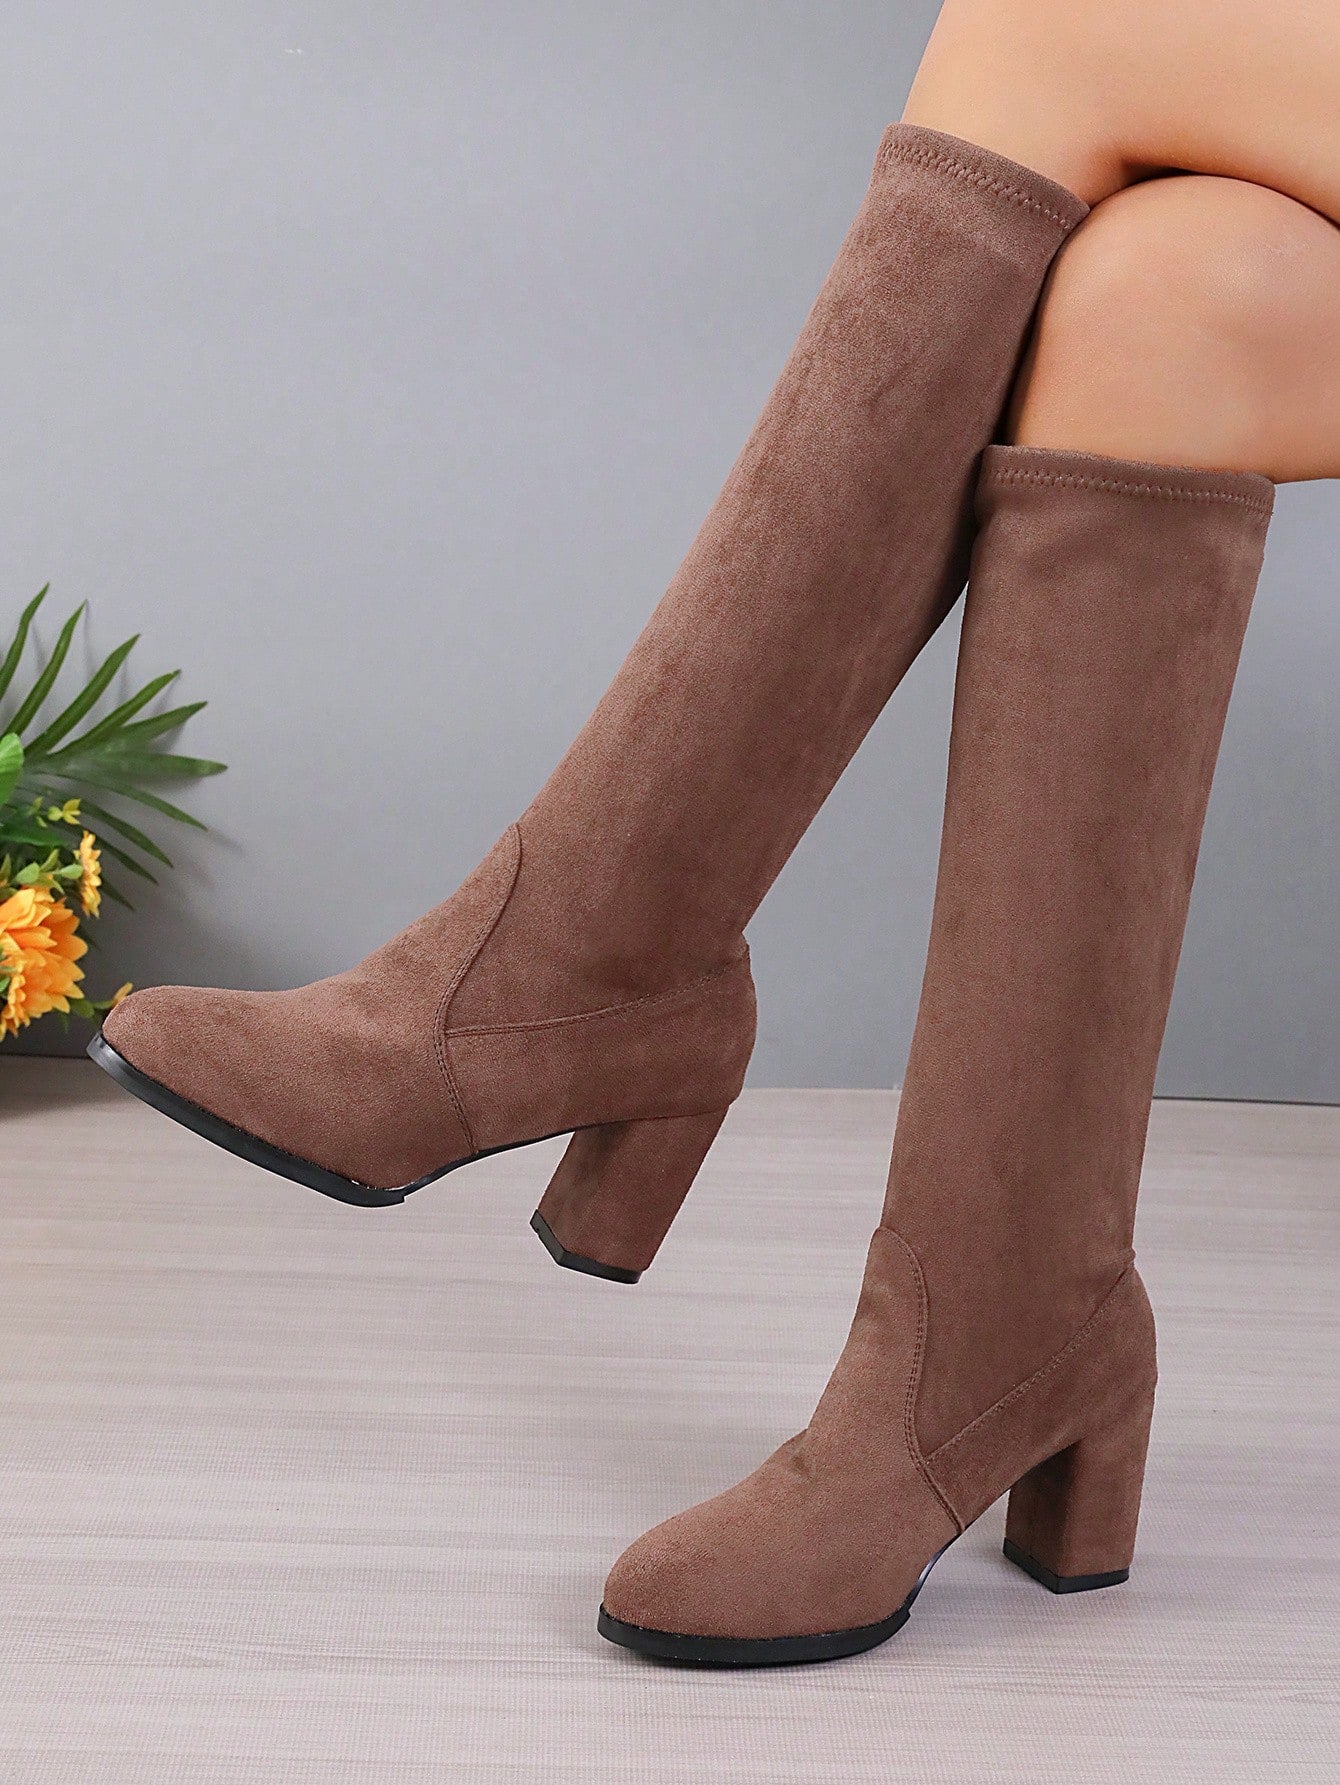 Autumn And Winter Brown Long Boots With Low Heels, Flat Soles, Elastic And Slimming Design For Students